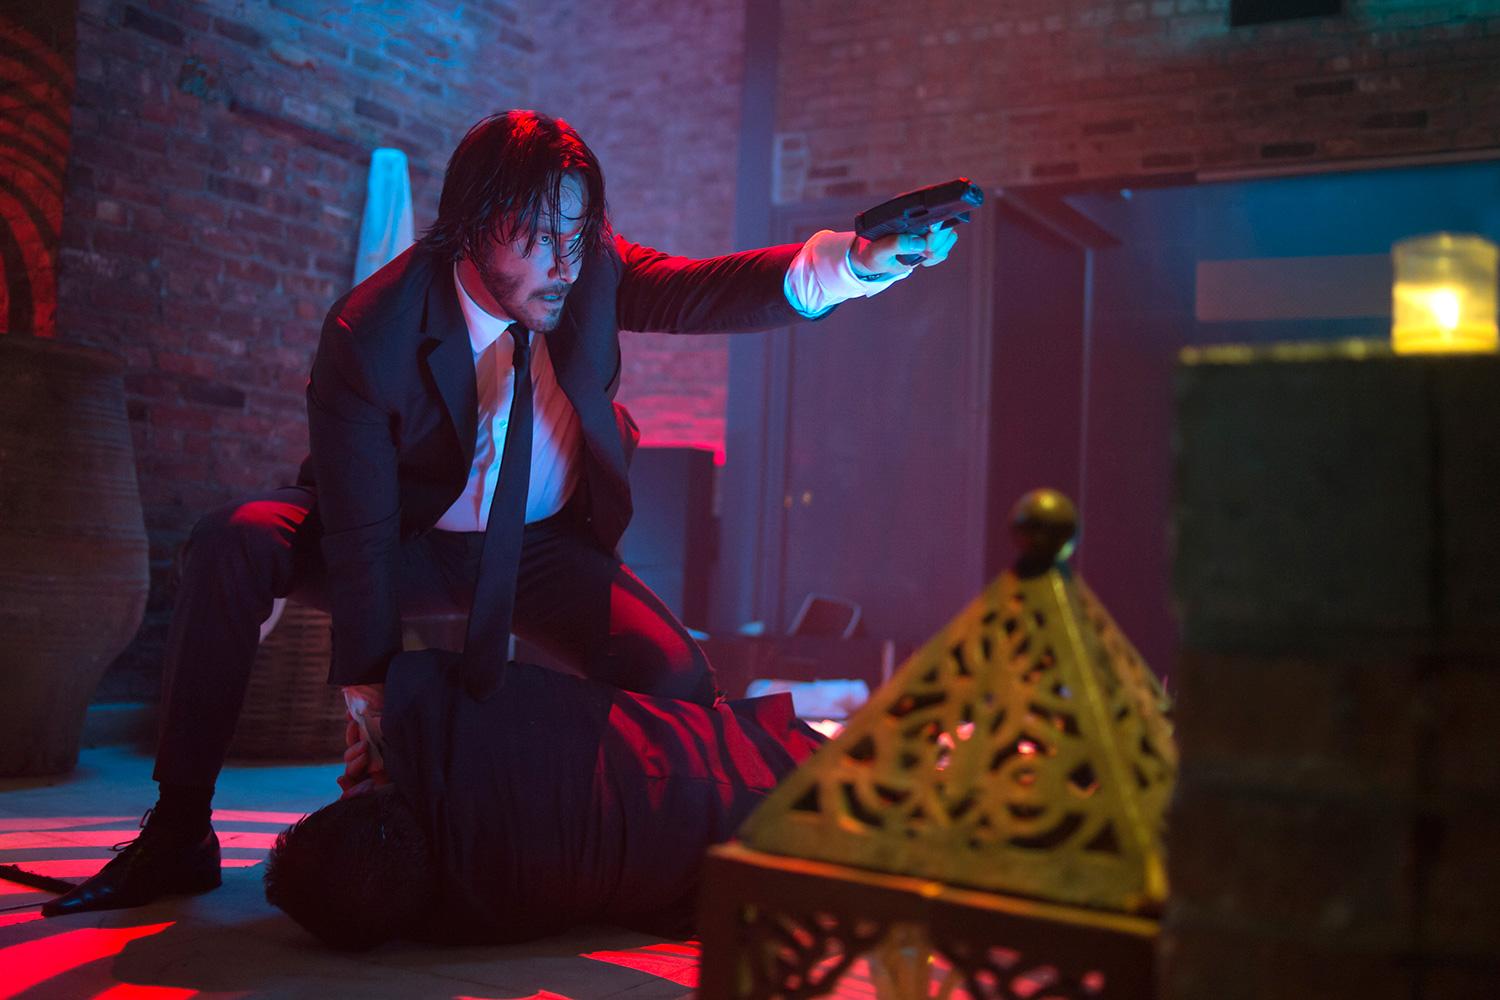 John Wick spin-off series 'The Continental' first look image